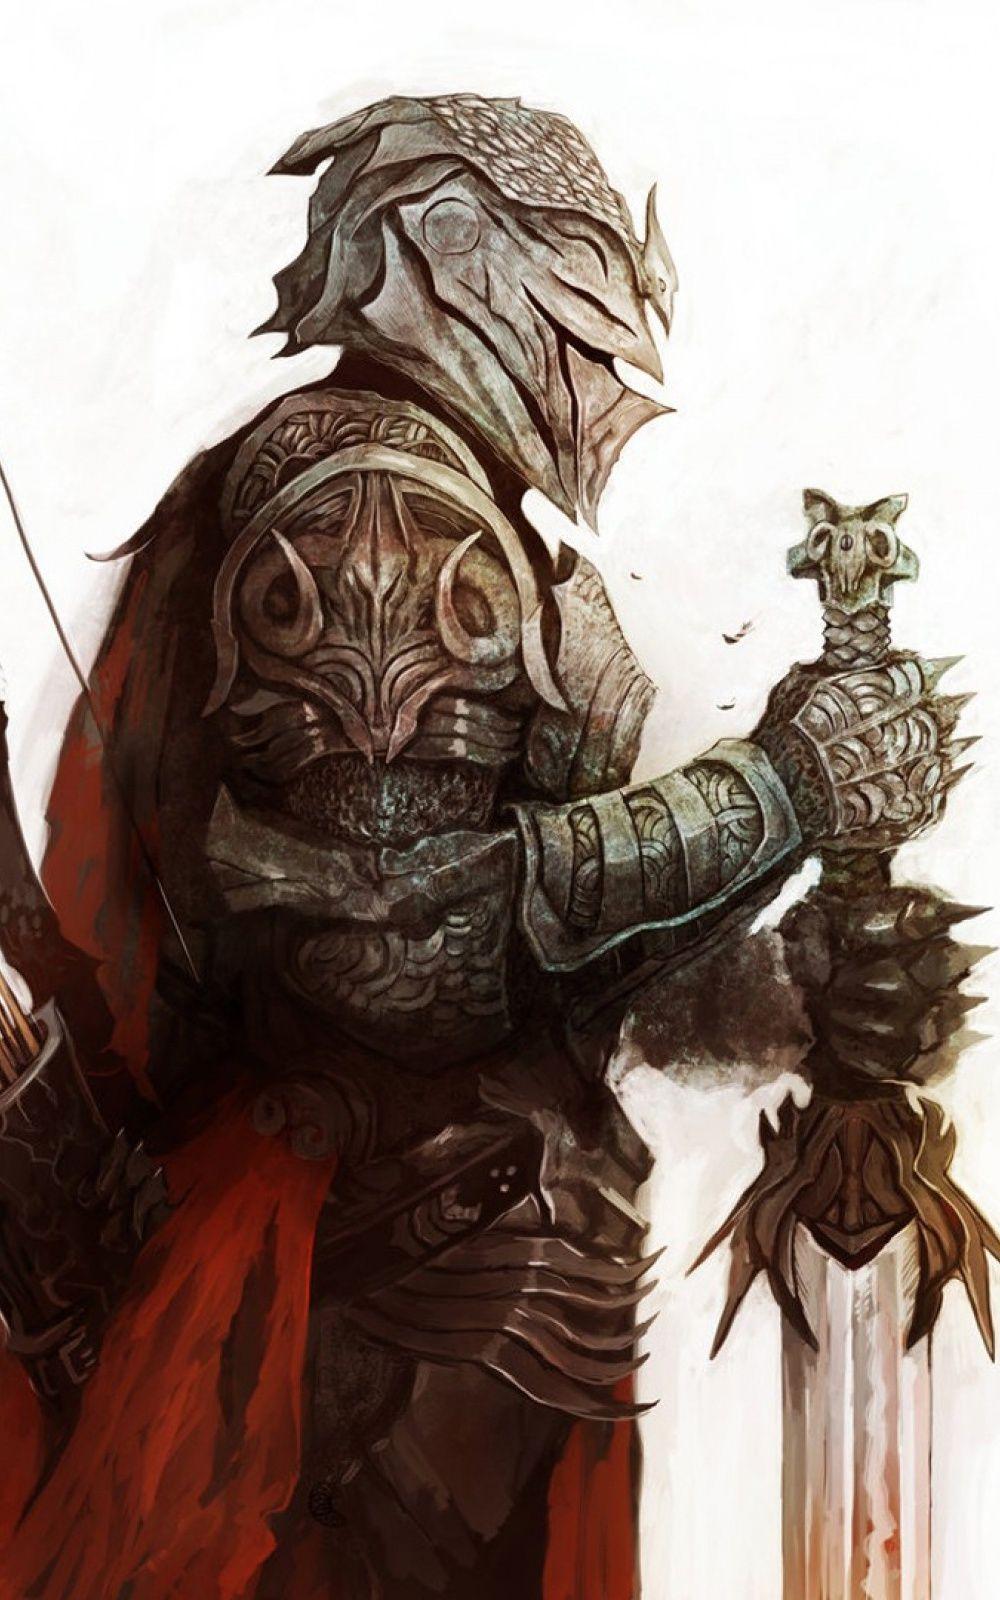 Armor Knight Sword Android Wallpaper free download